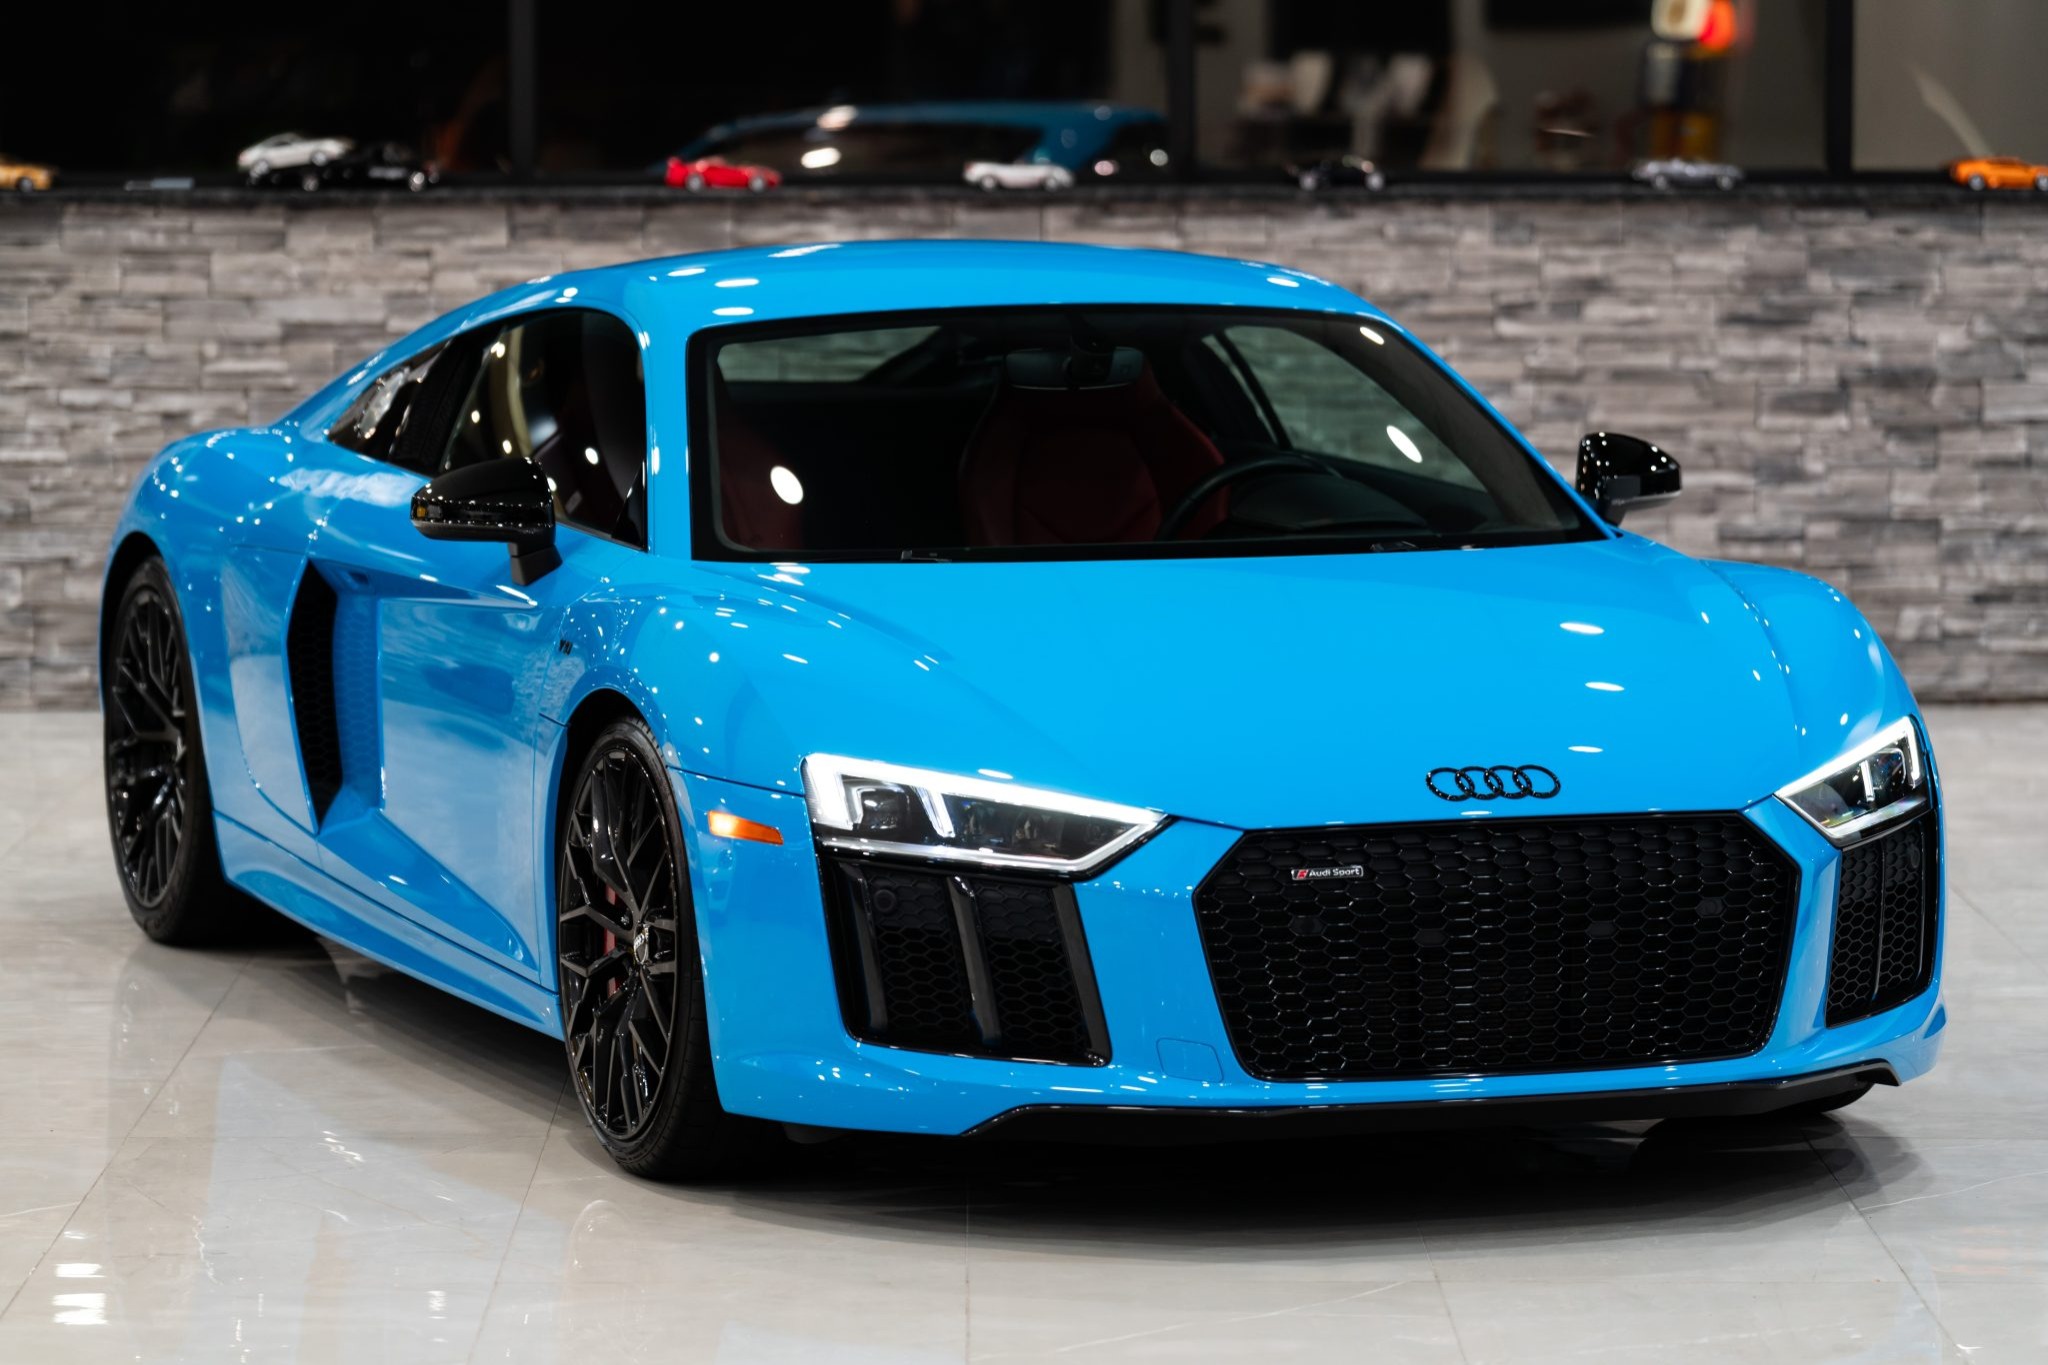 Used Riviera Blue 2018 Audi R8 V10 Coupe RWS Review